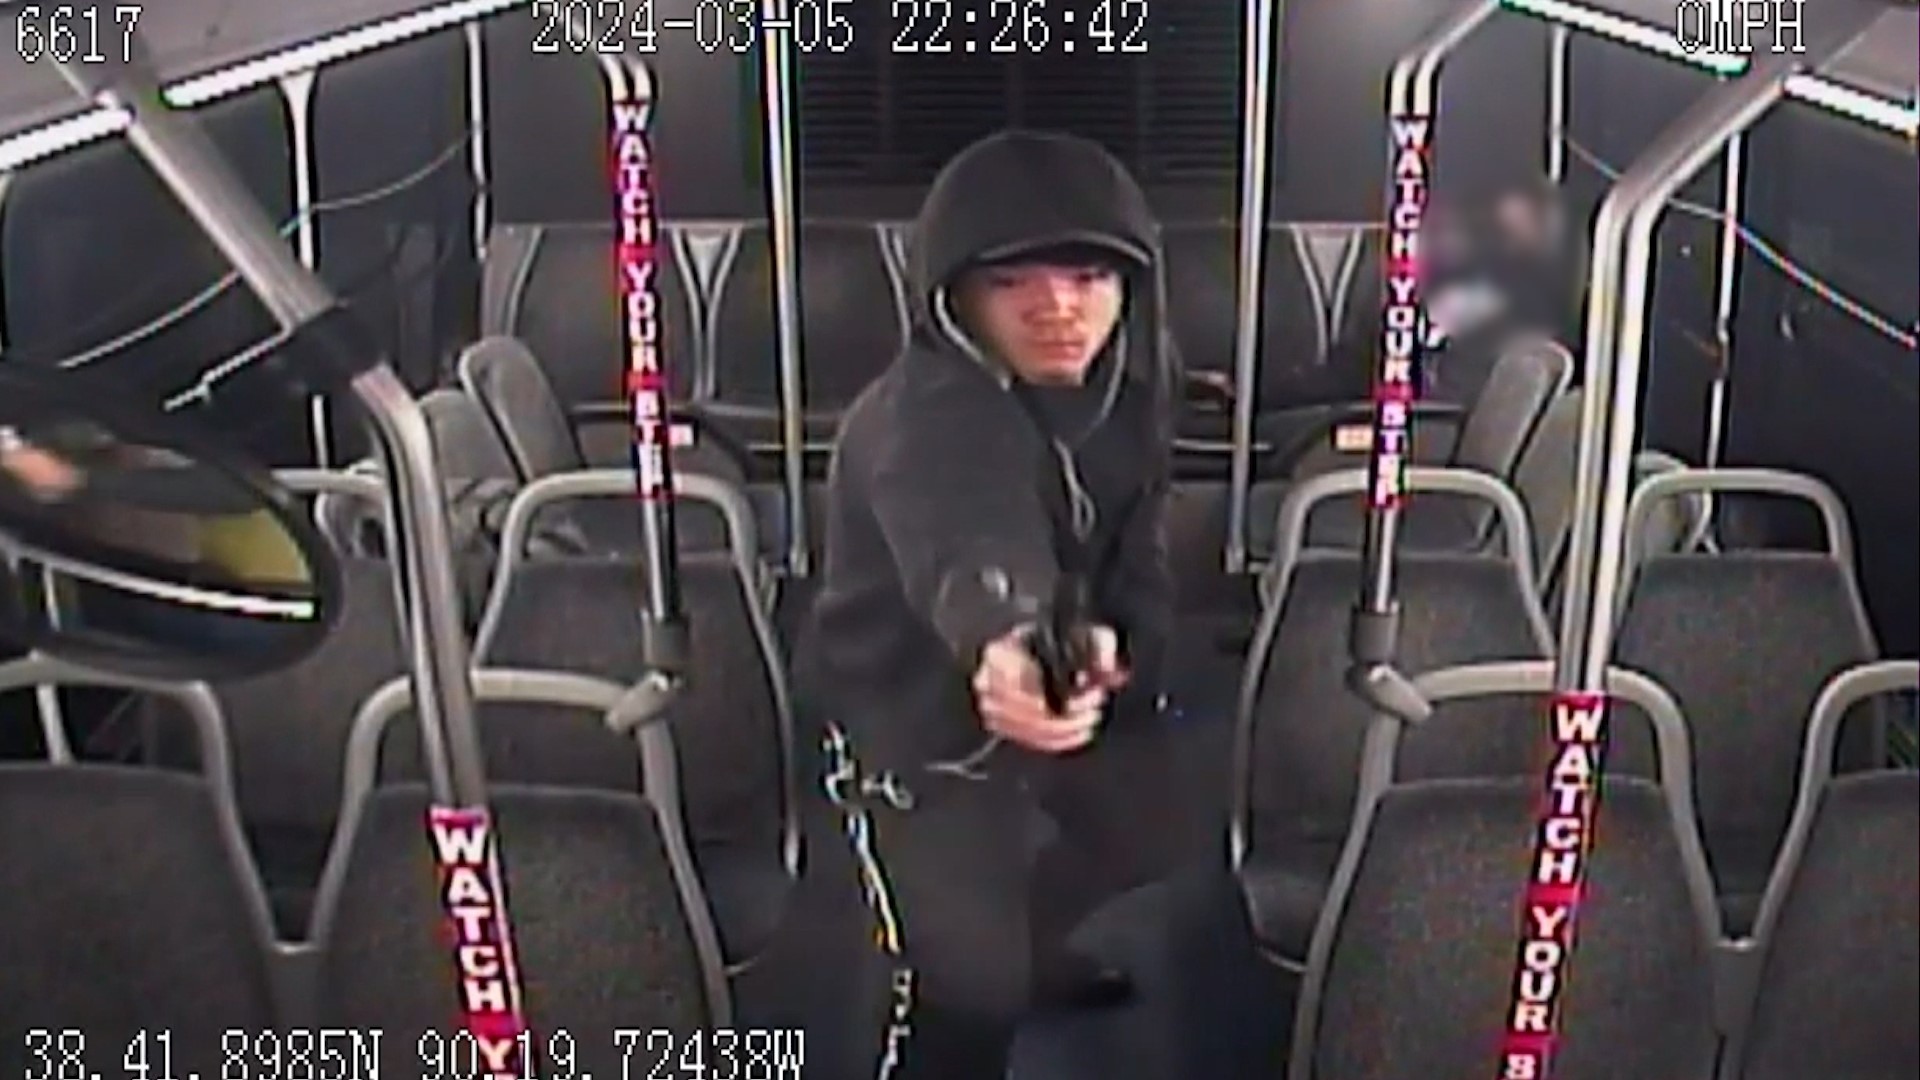 Police are working to identify the man who shot and injured another passenger on a MetroBus in Vinita Park last week.